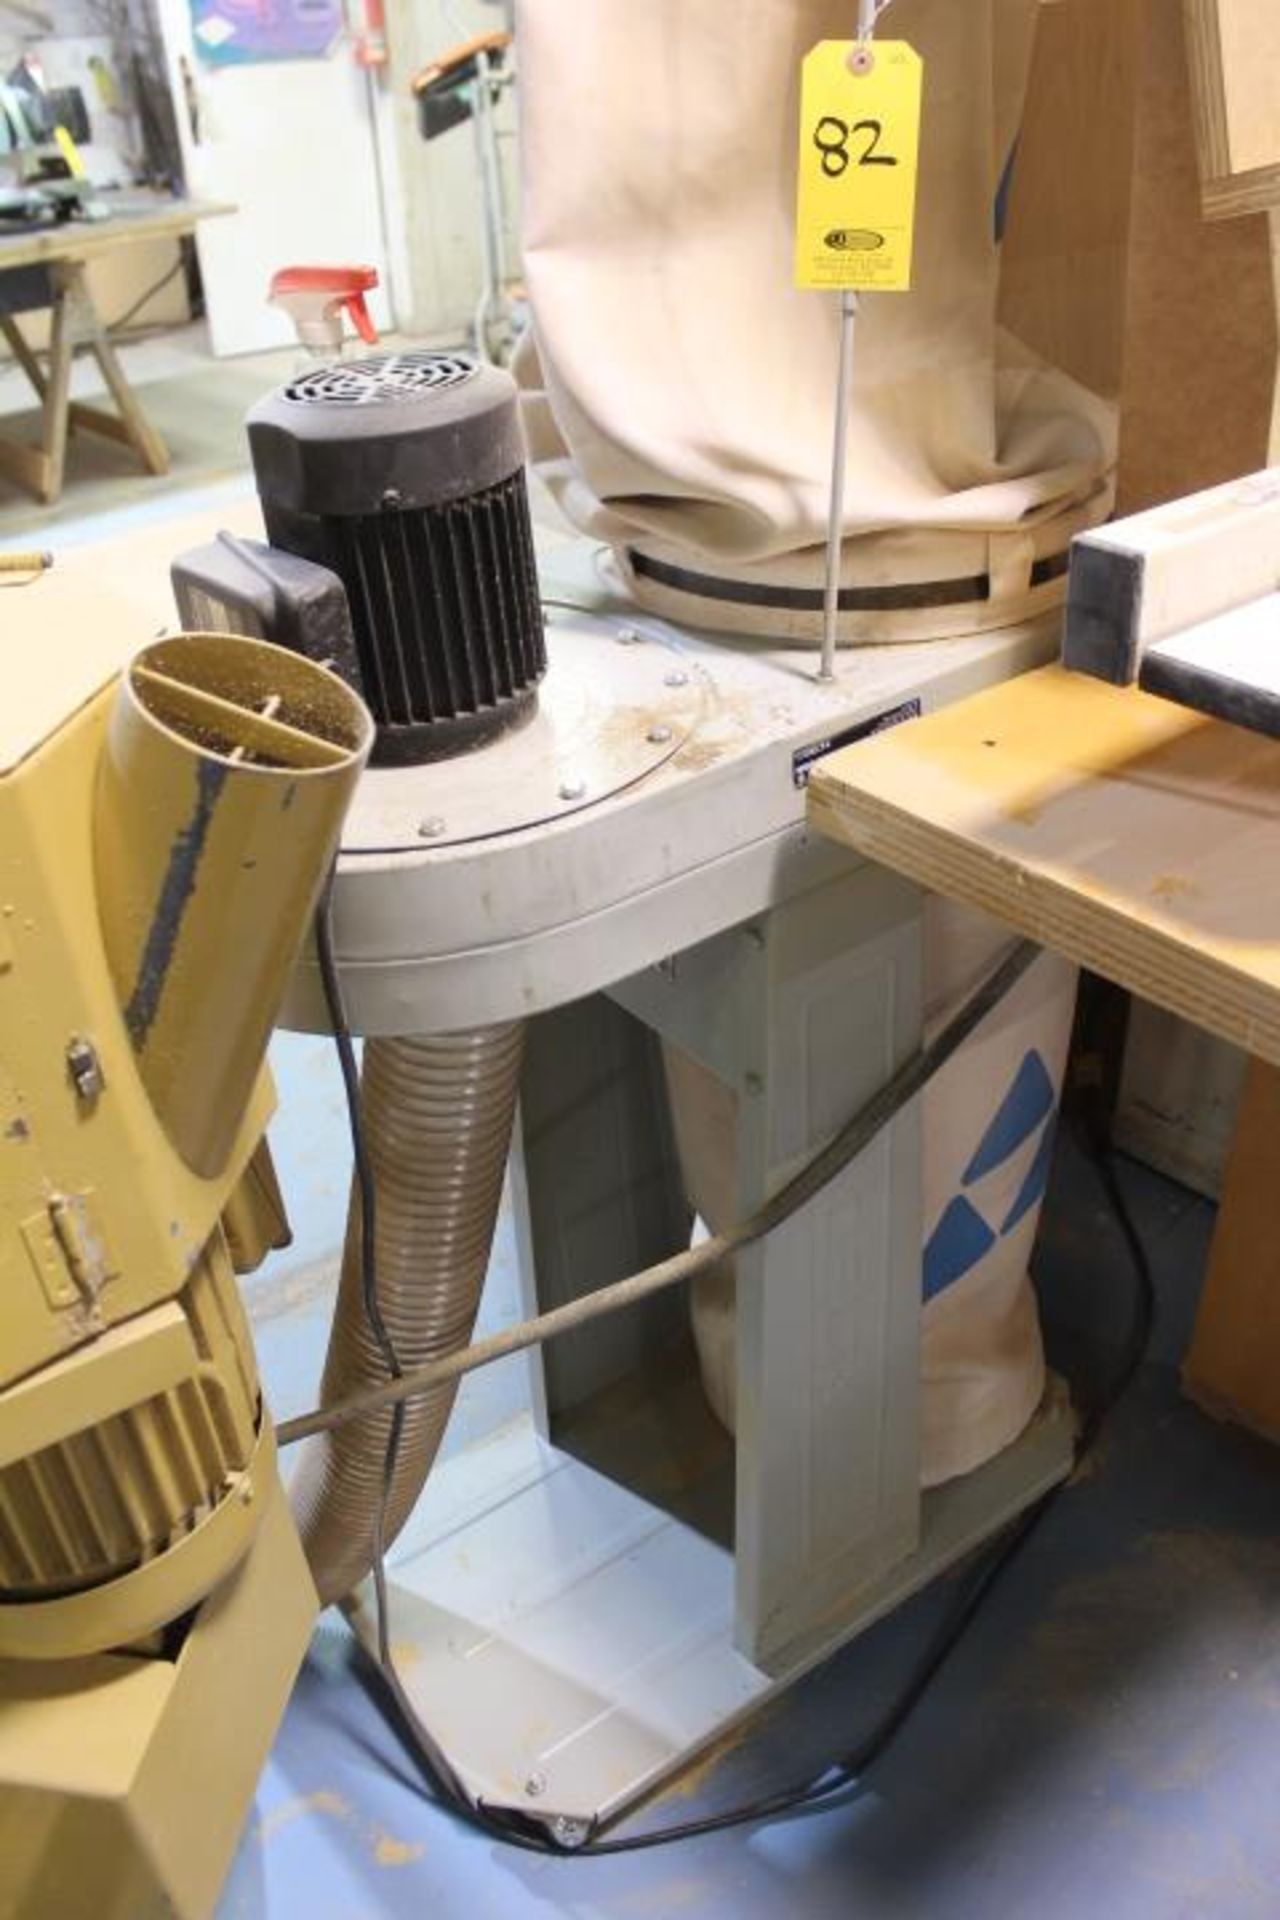 DELTA AP400 1 HP PORTABLE DUST COLLECTOR - Image 3 of 3